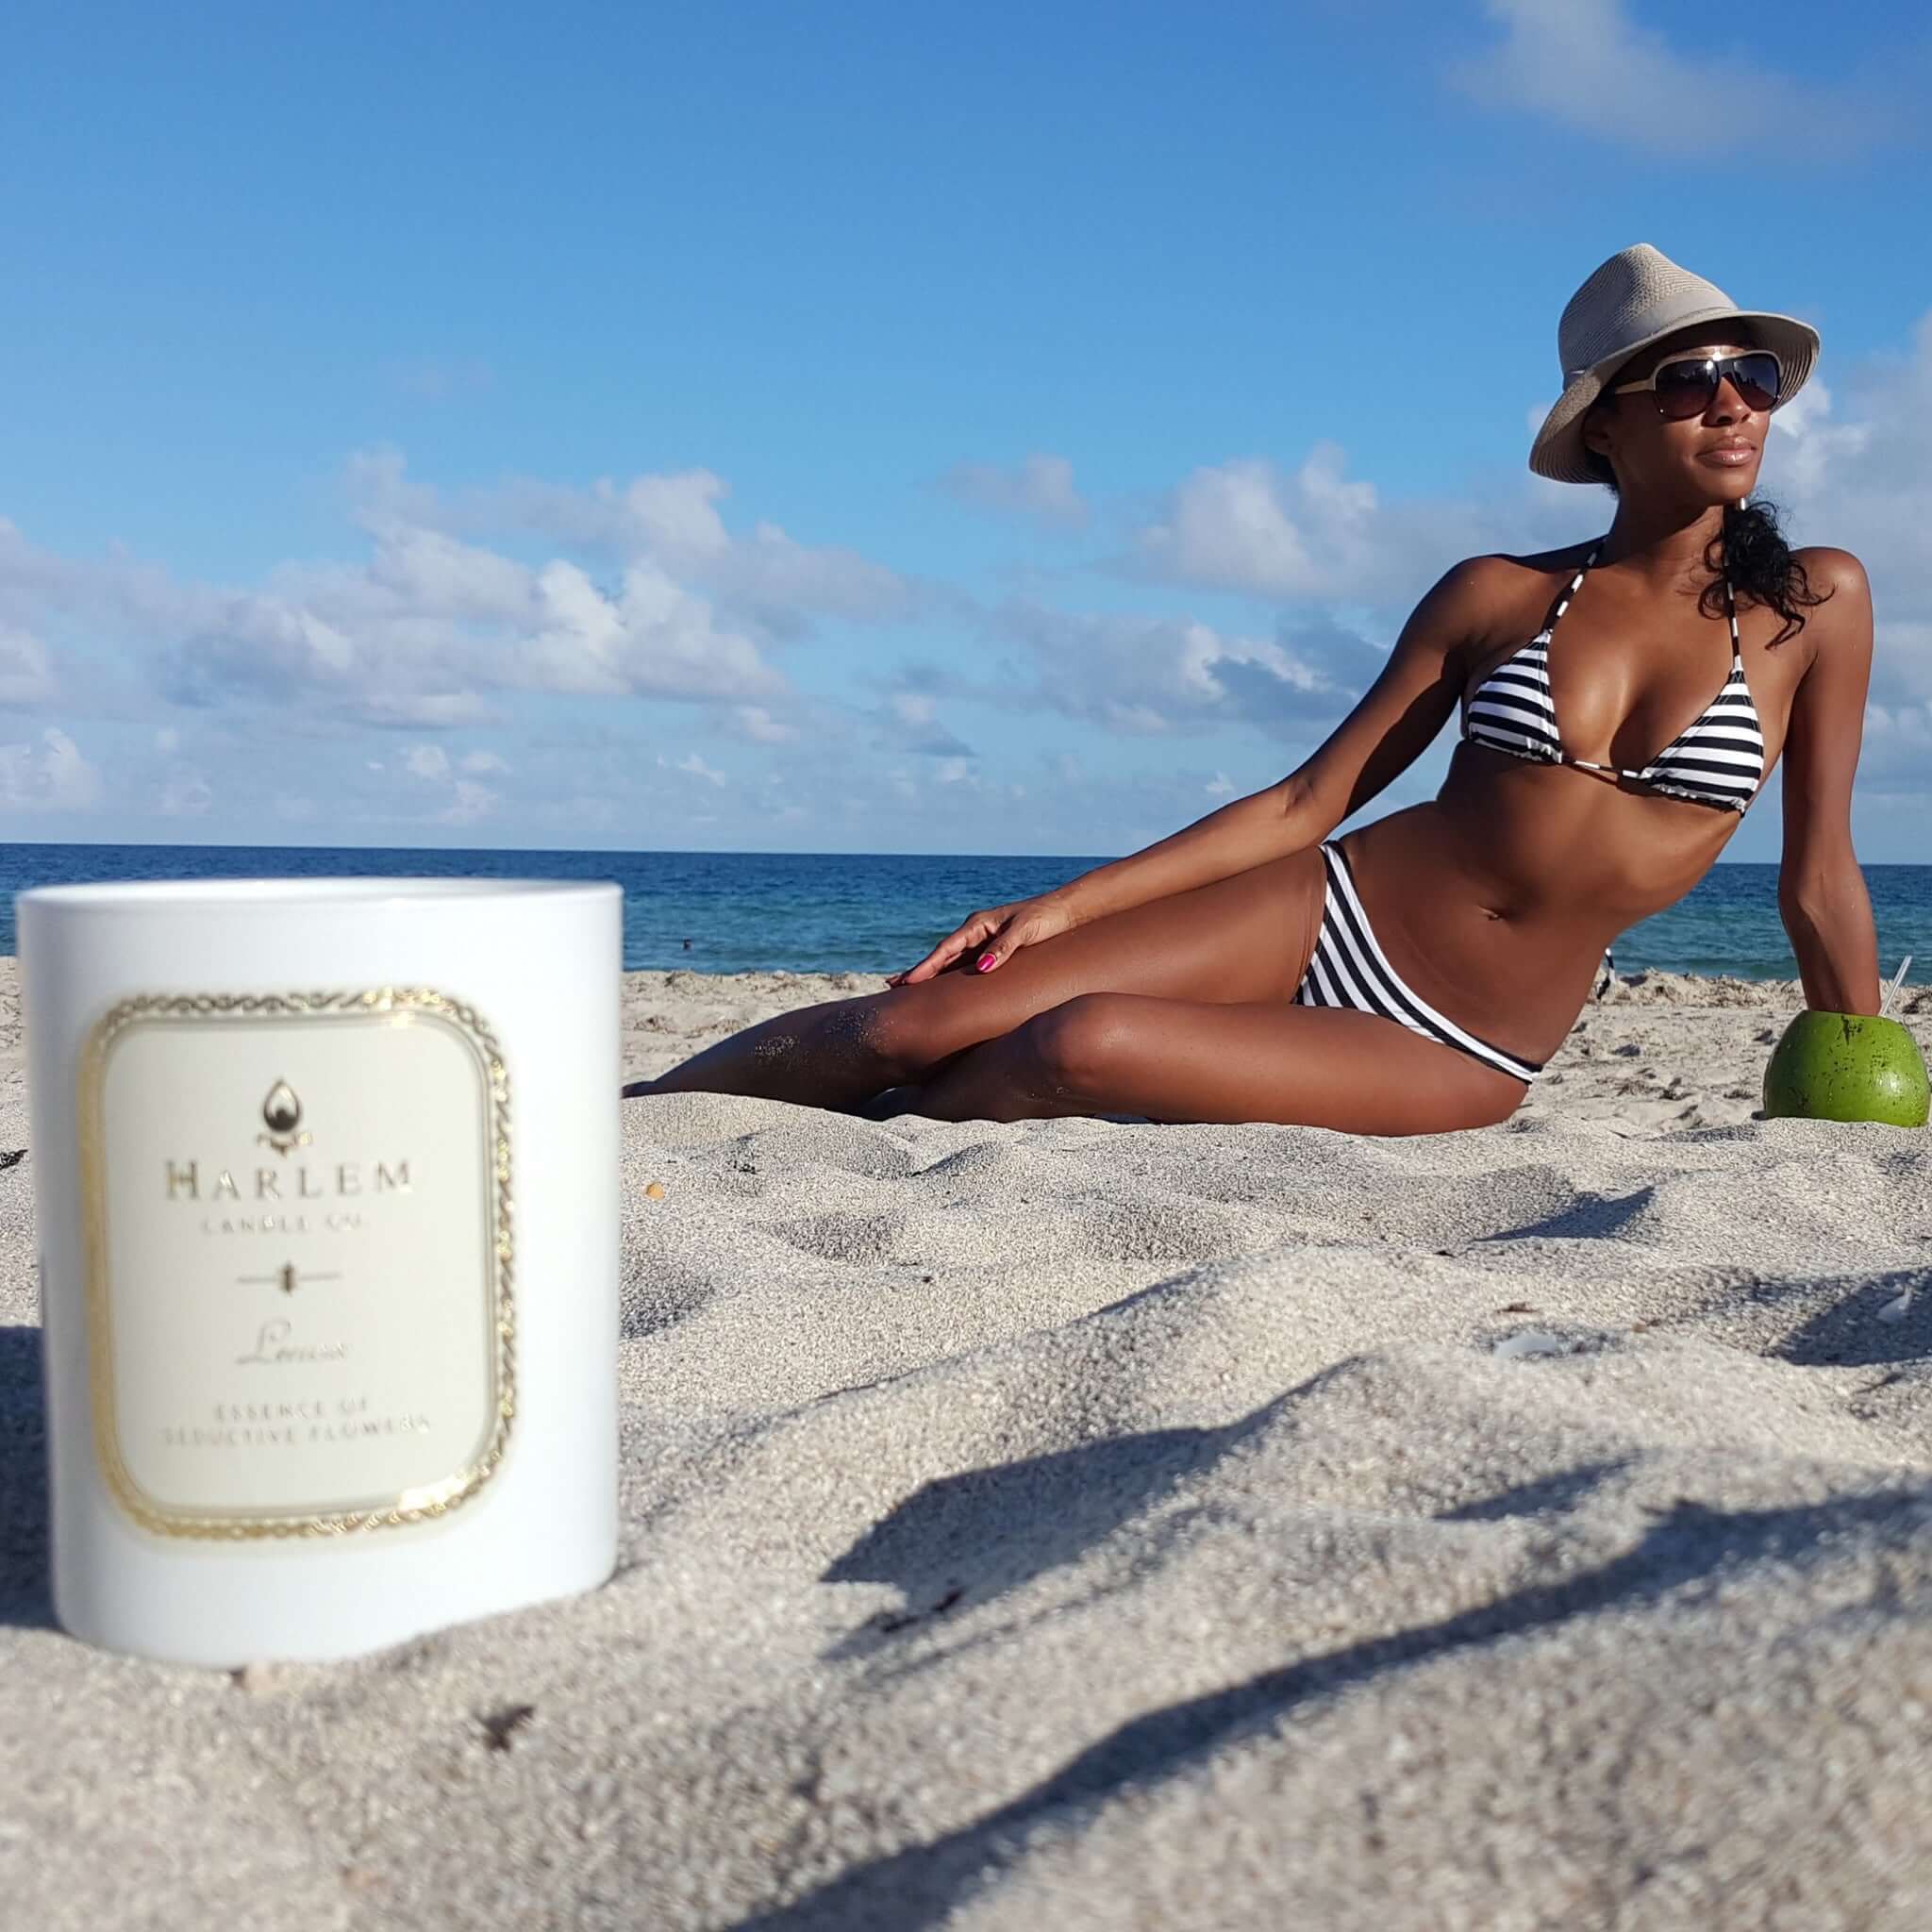 This photo is a lifestyle image of our Lenox 11 oz Candle in the sand at the beach with our stunning founder sunbathing.